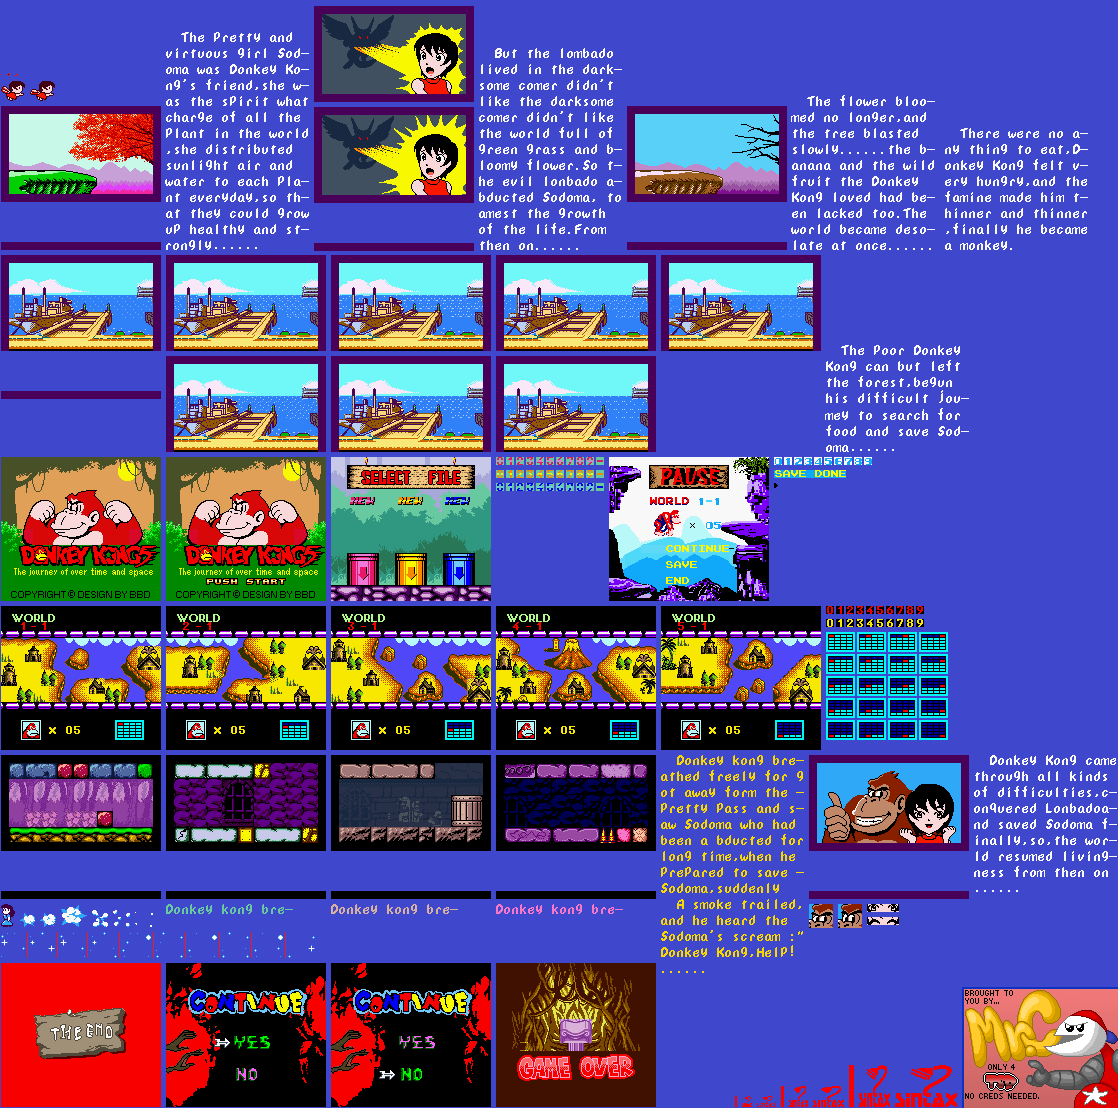 Donkey Kong 5: The Journey of Over Time and Space (Bootleg) - Title Screen, Intro, and Other Screens